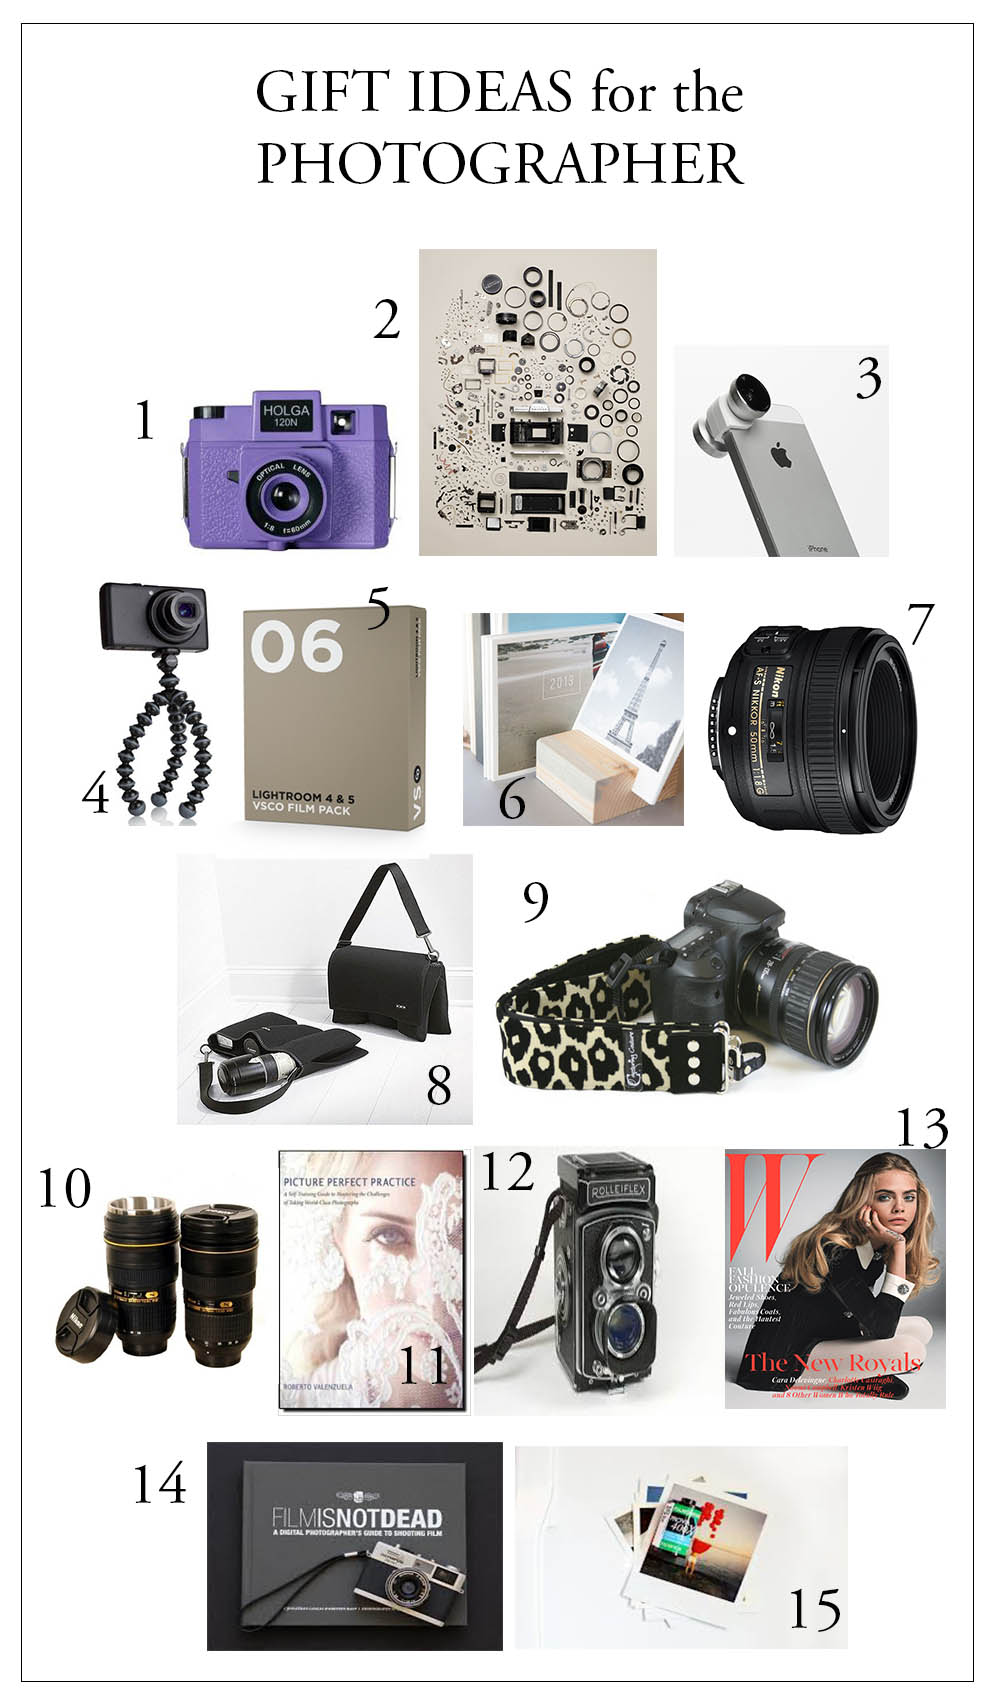 Gift ideas for photographers